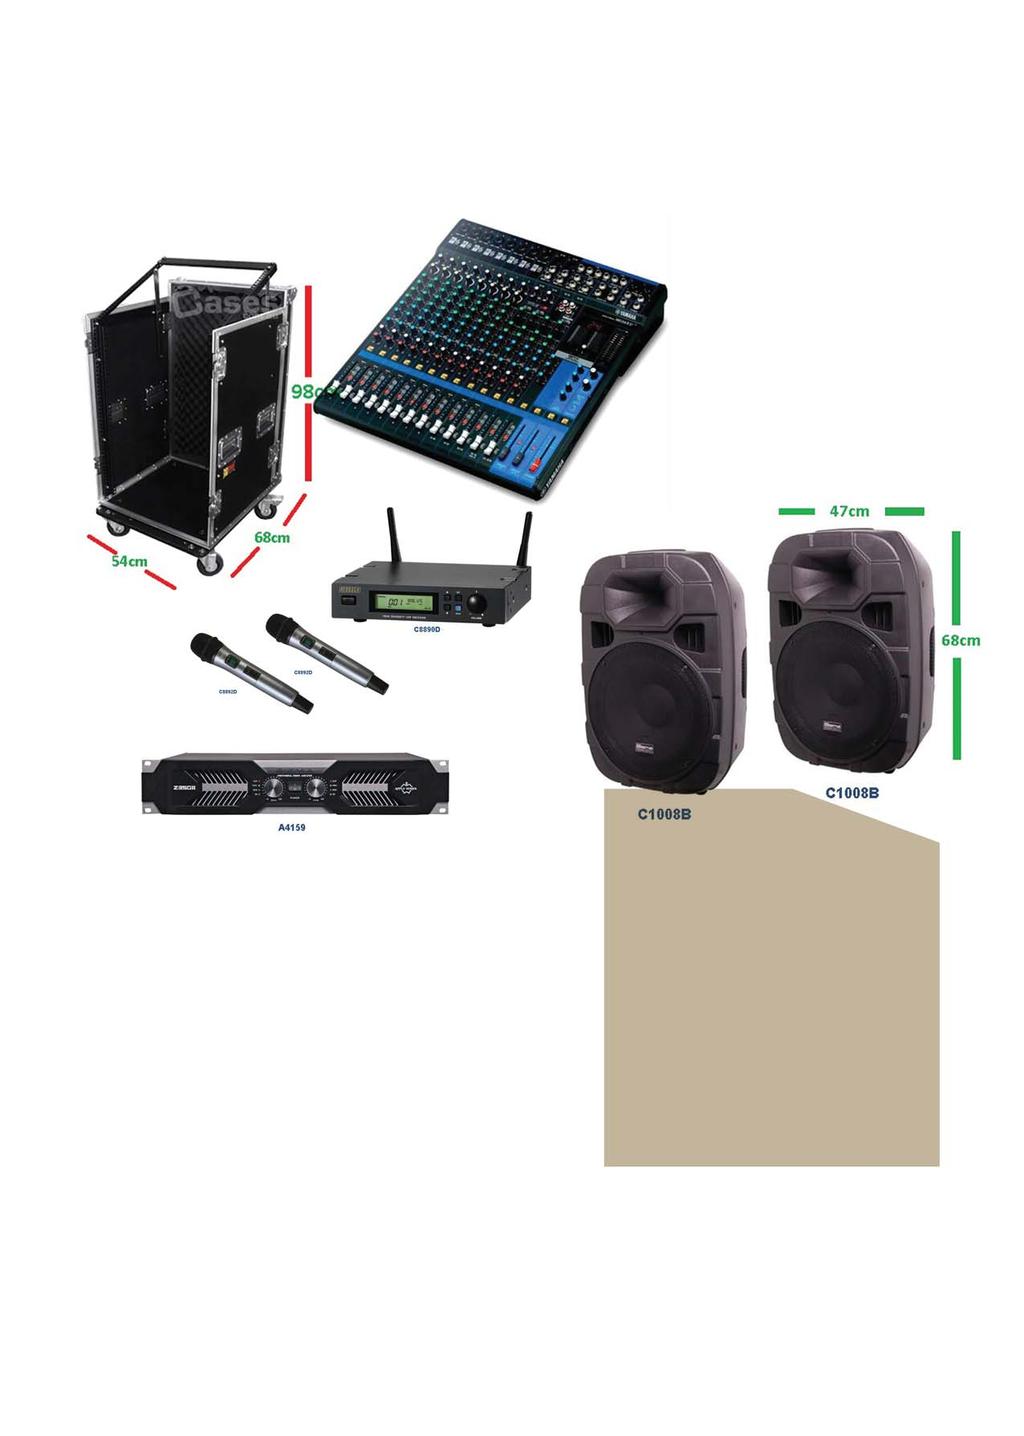 Mobile HALL PA (in roller case for lock up night storage) 16 350 Channel Watt Stereo Roller PA Case-16C - 98cm H x 54cm W x 68cm D - RRP: $799 Yamaha MG16XU - 16 Input Mixer w/ FX & USB Audio